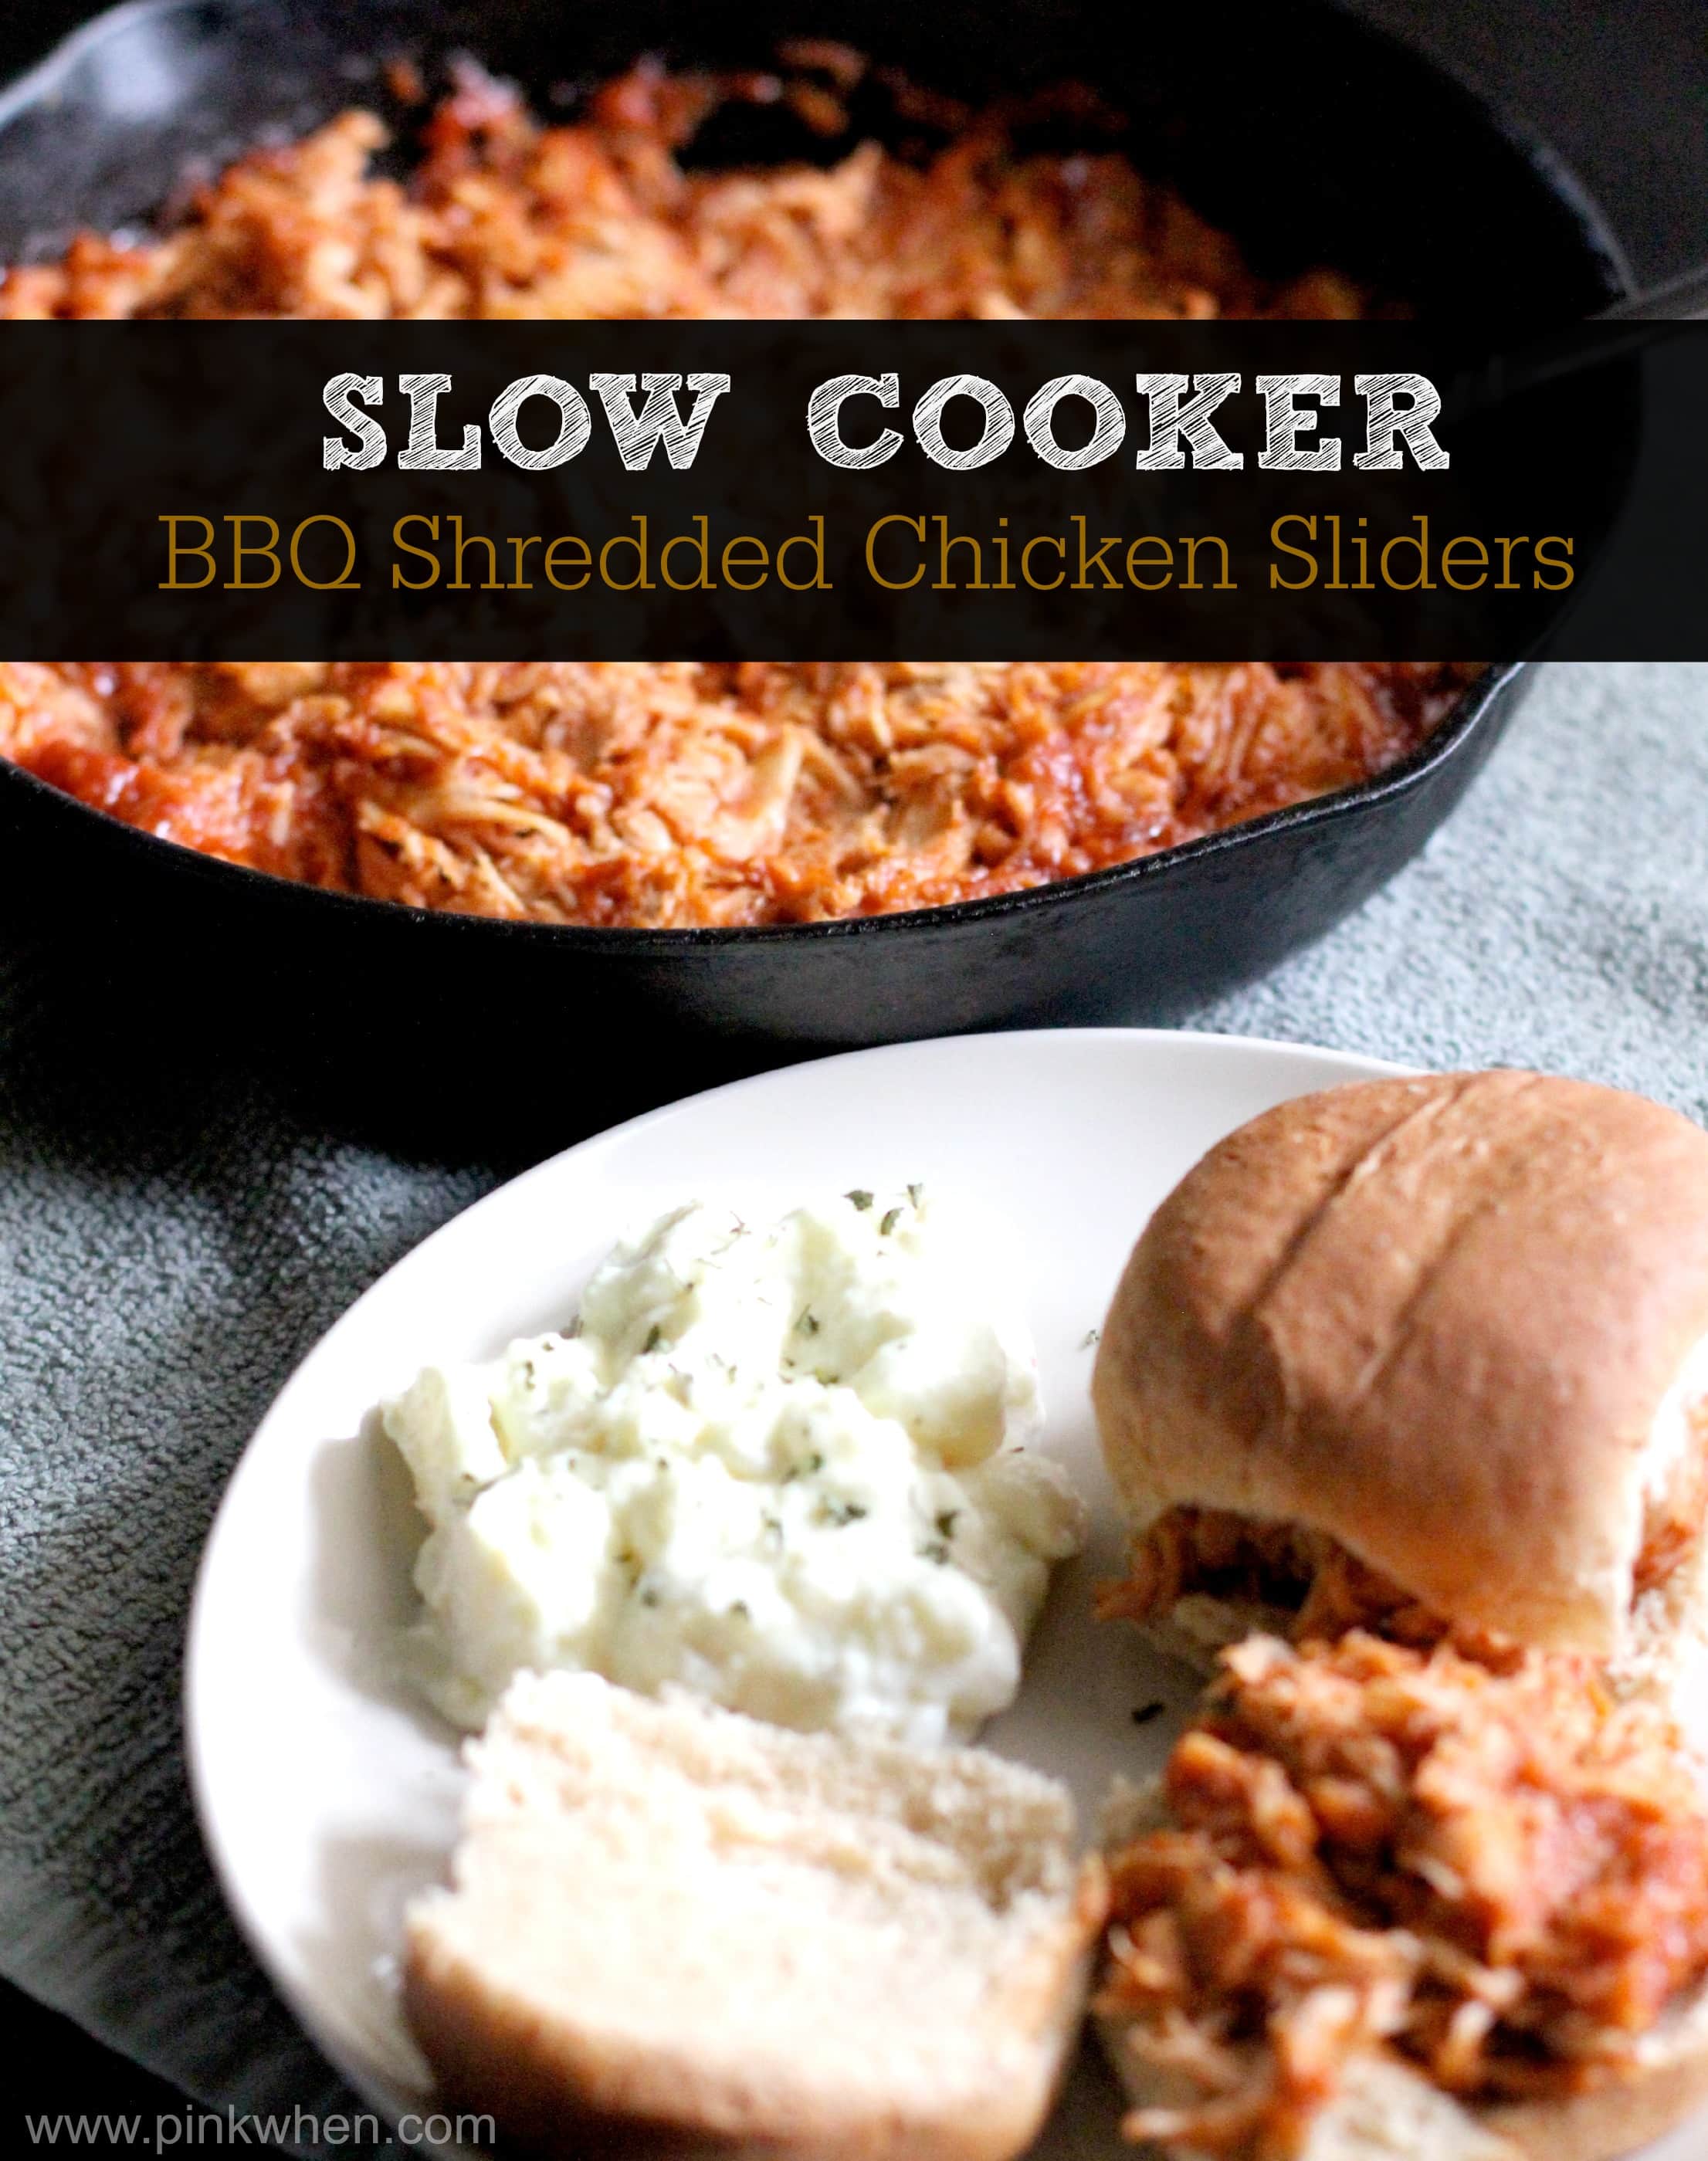 Slow Cooker BBQ Pulled Chicken Sliders